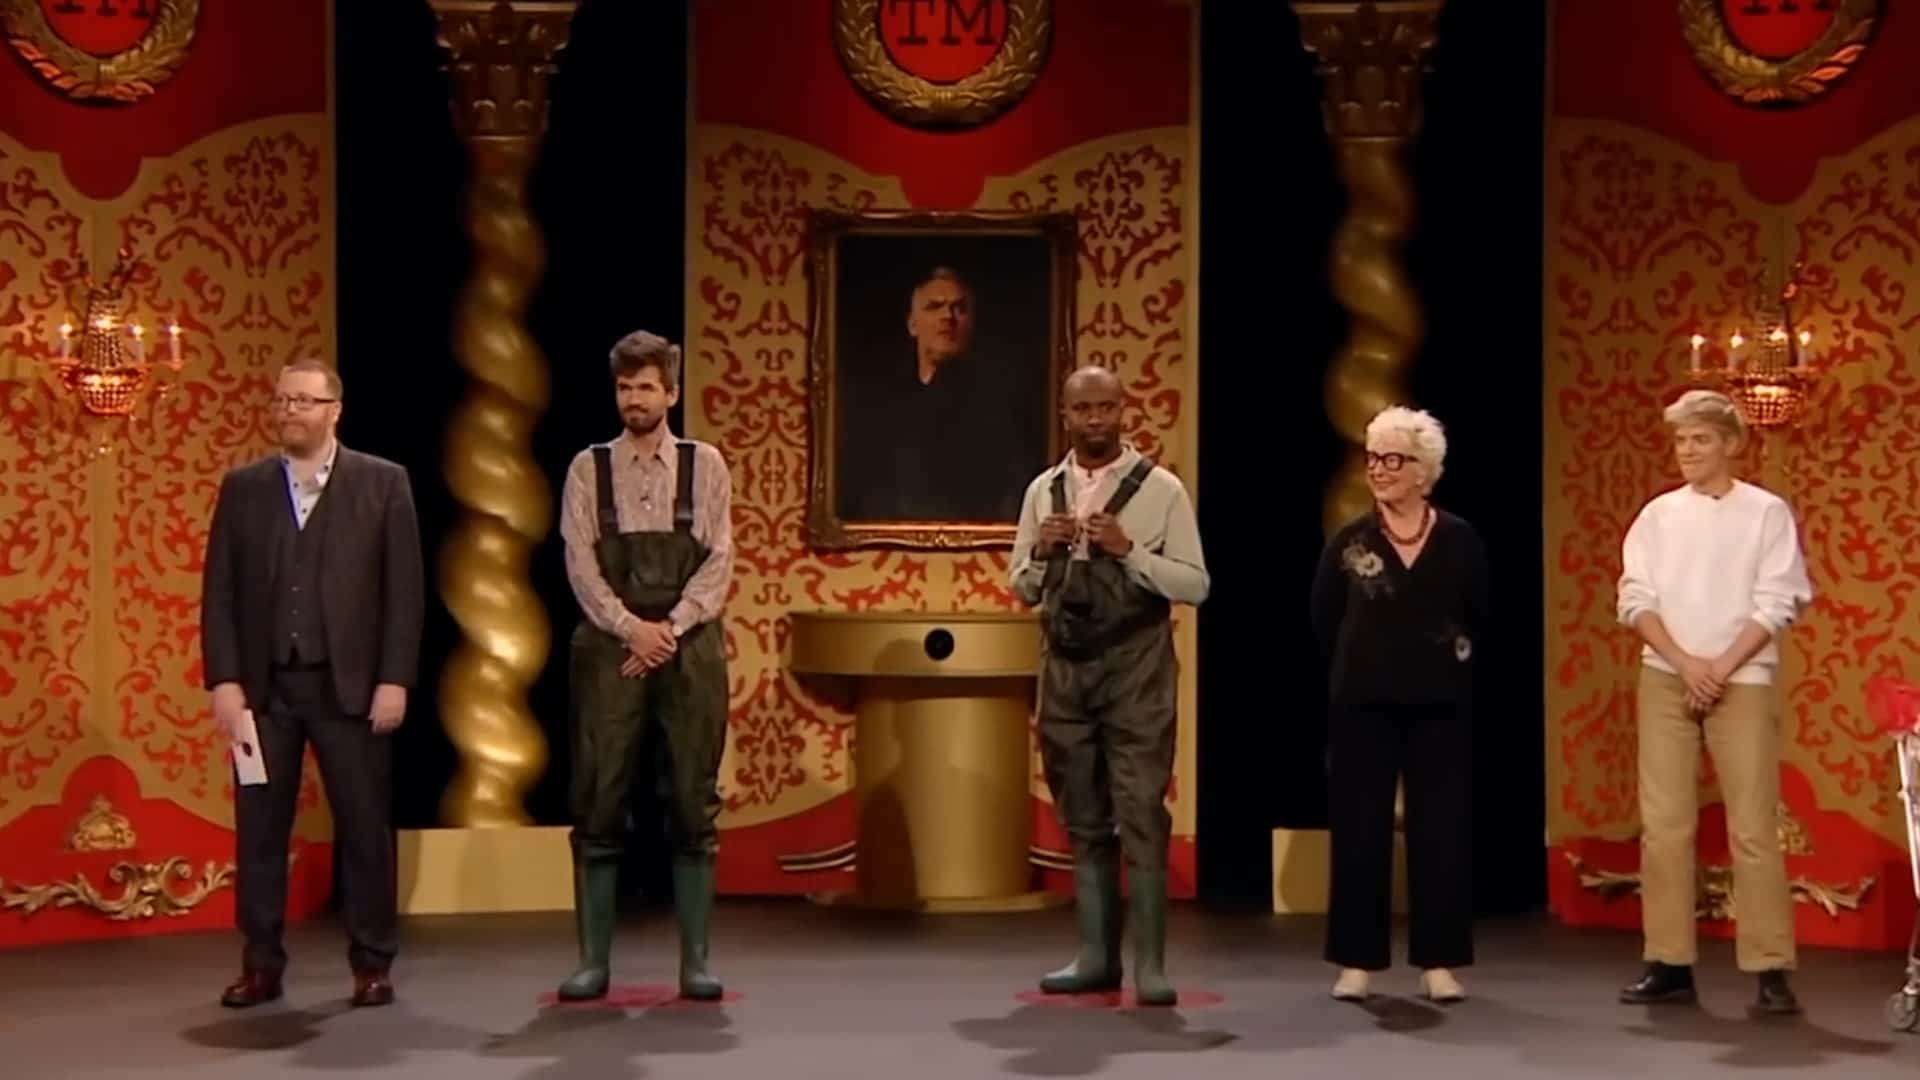 Taskmaster Season 15 Episode 1: Release Date, Preview & How to Watch